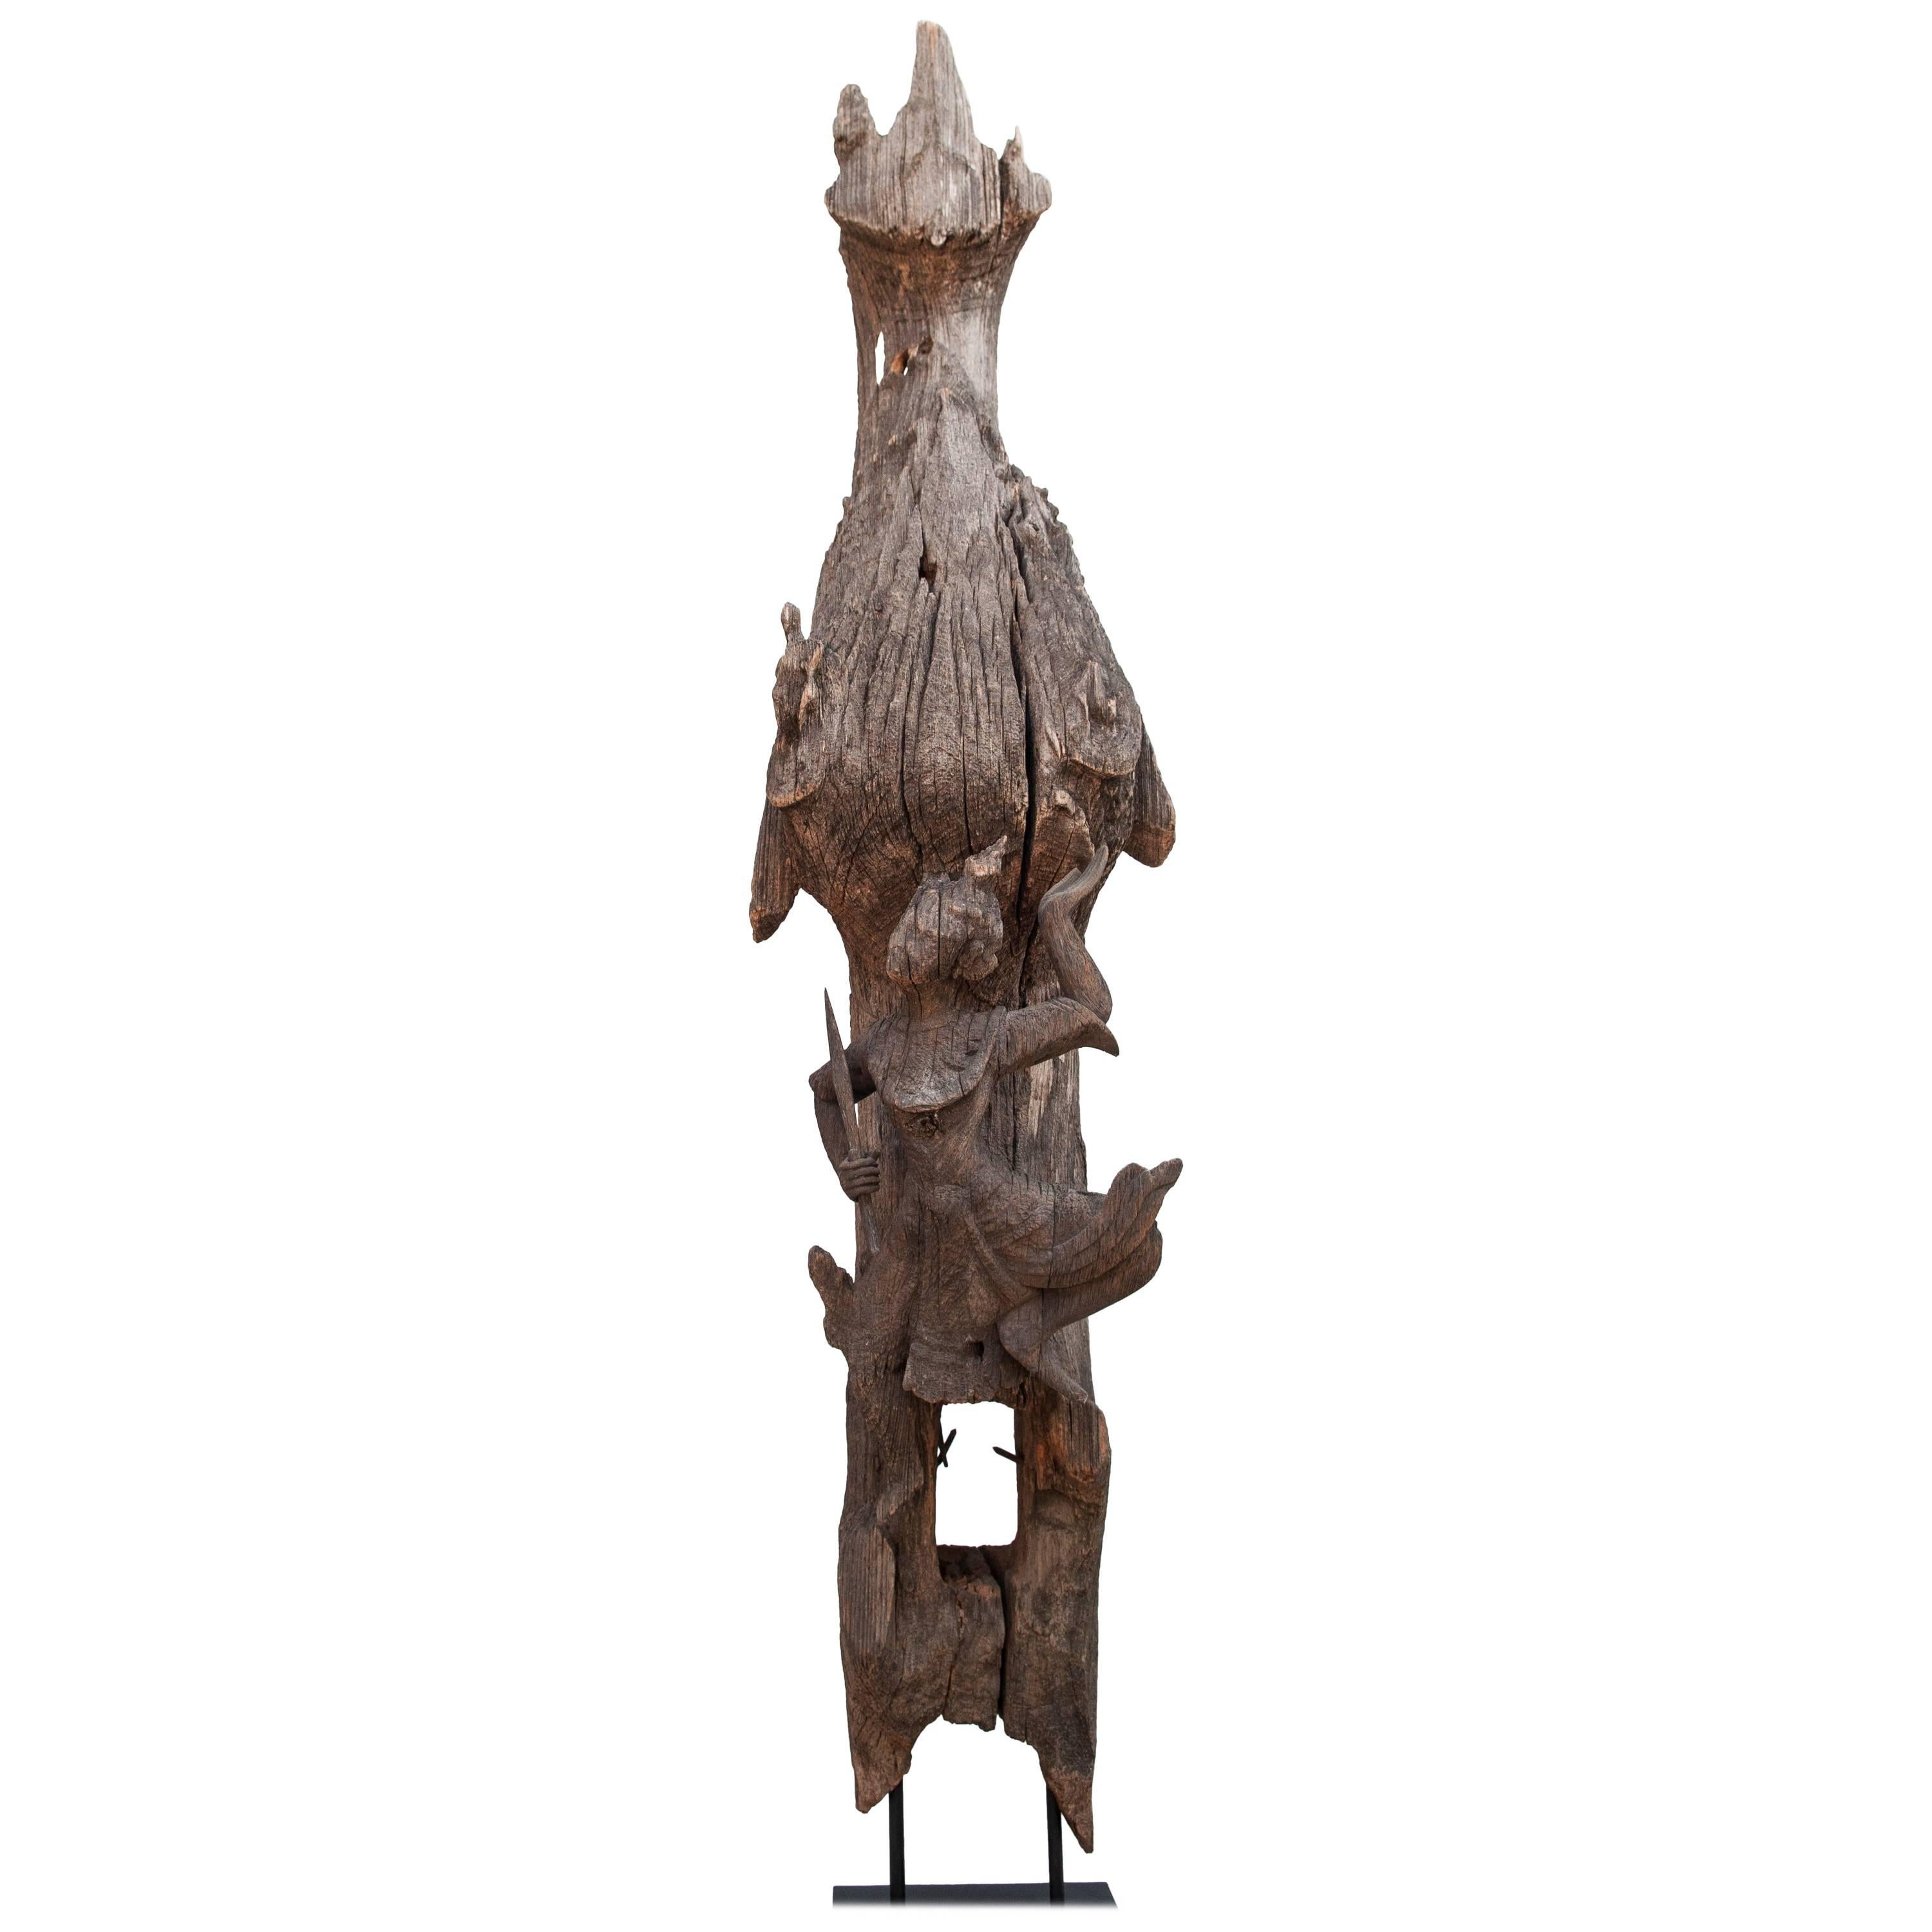 Chofa Roof Finial from Burma, Carved and Eroded Teak Wood, Early 20th Century